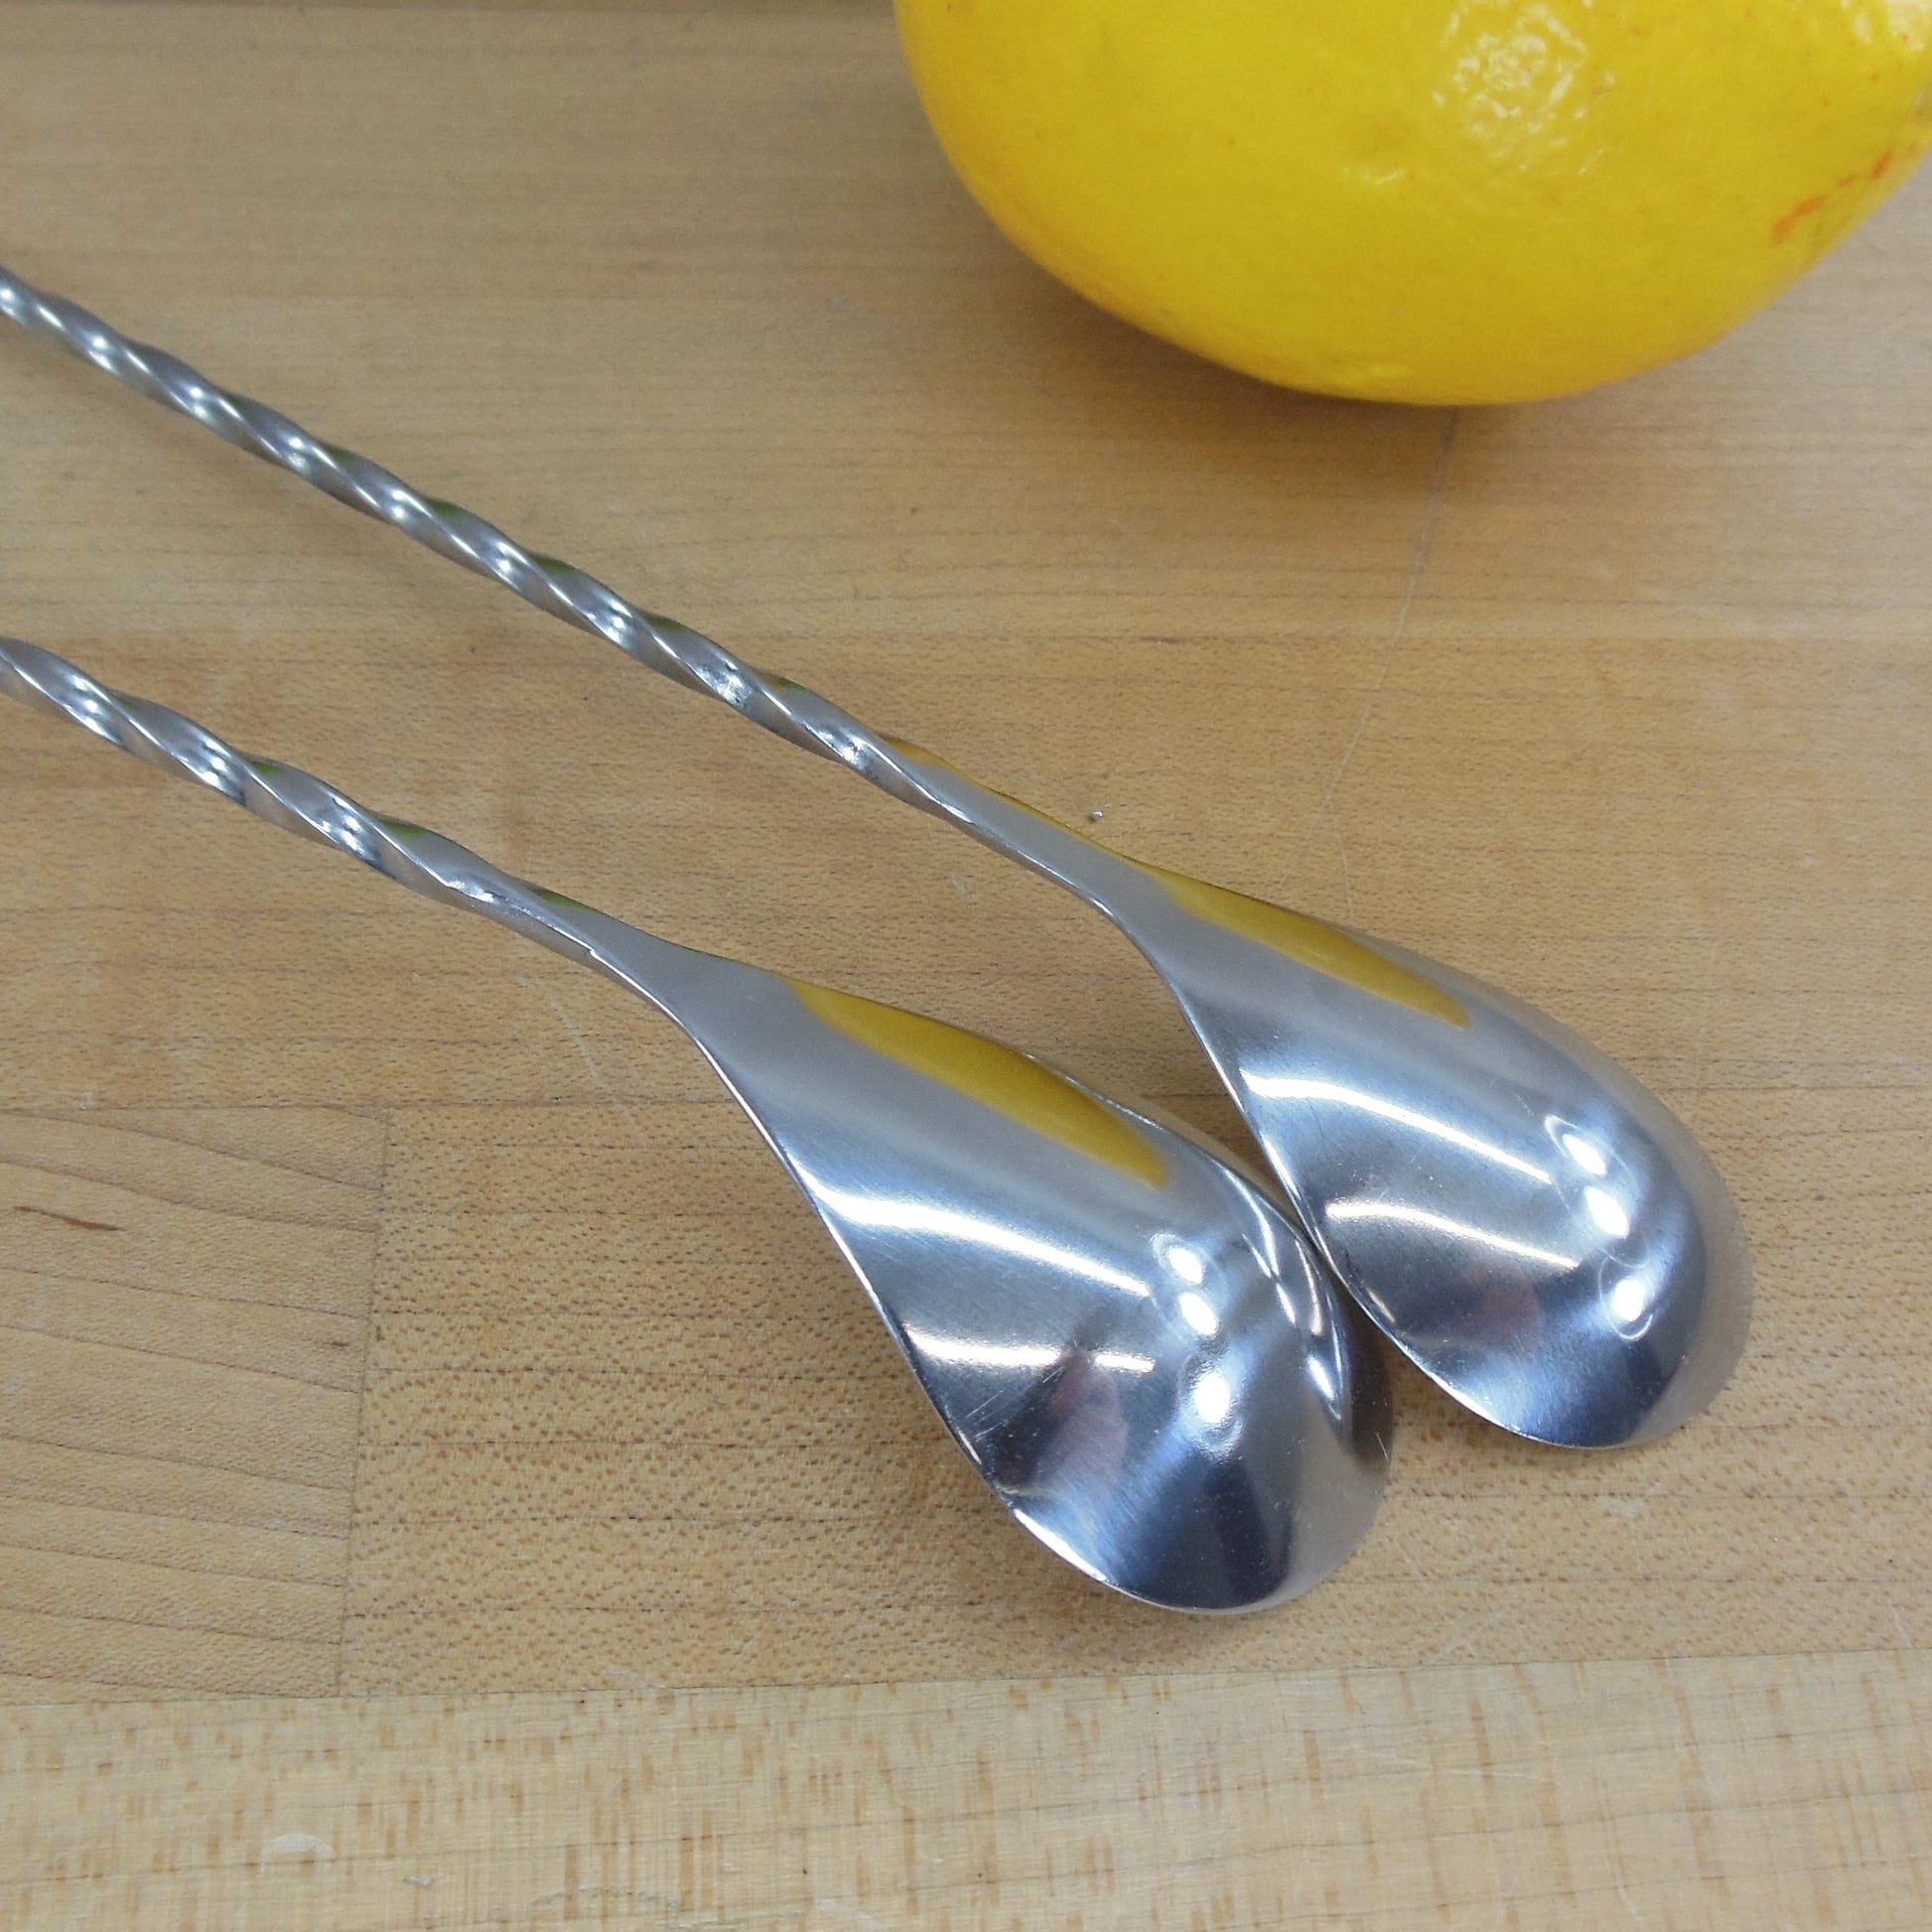 Jillmo & GB Twist Stainless Bar Cocktail Stirrer Spoons Used